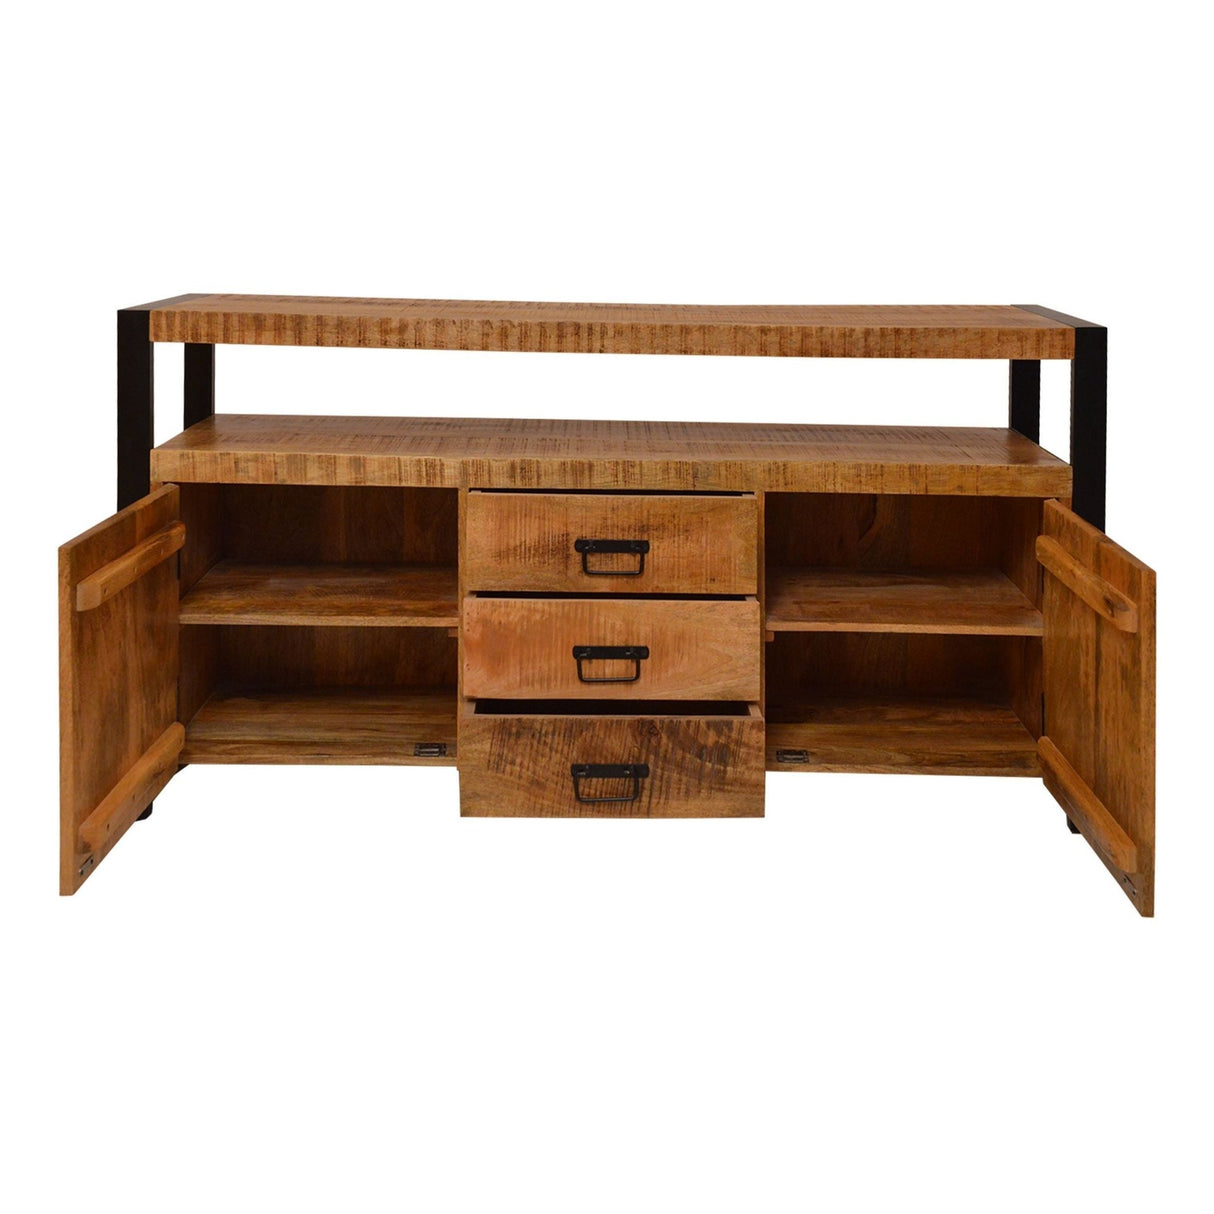 60 Inch 2 Door Mango Wood Media Console TV Stand, 3 Drawers, Brown and Black Home Elegance USA